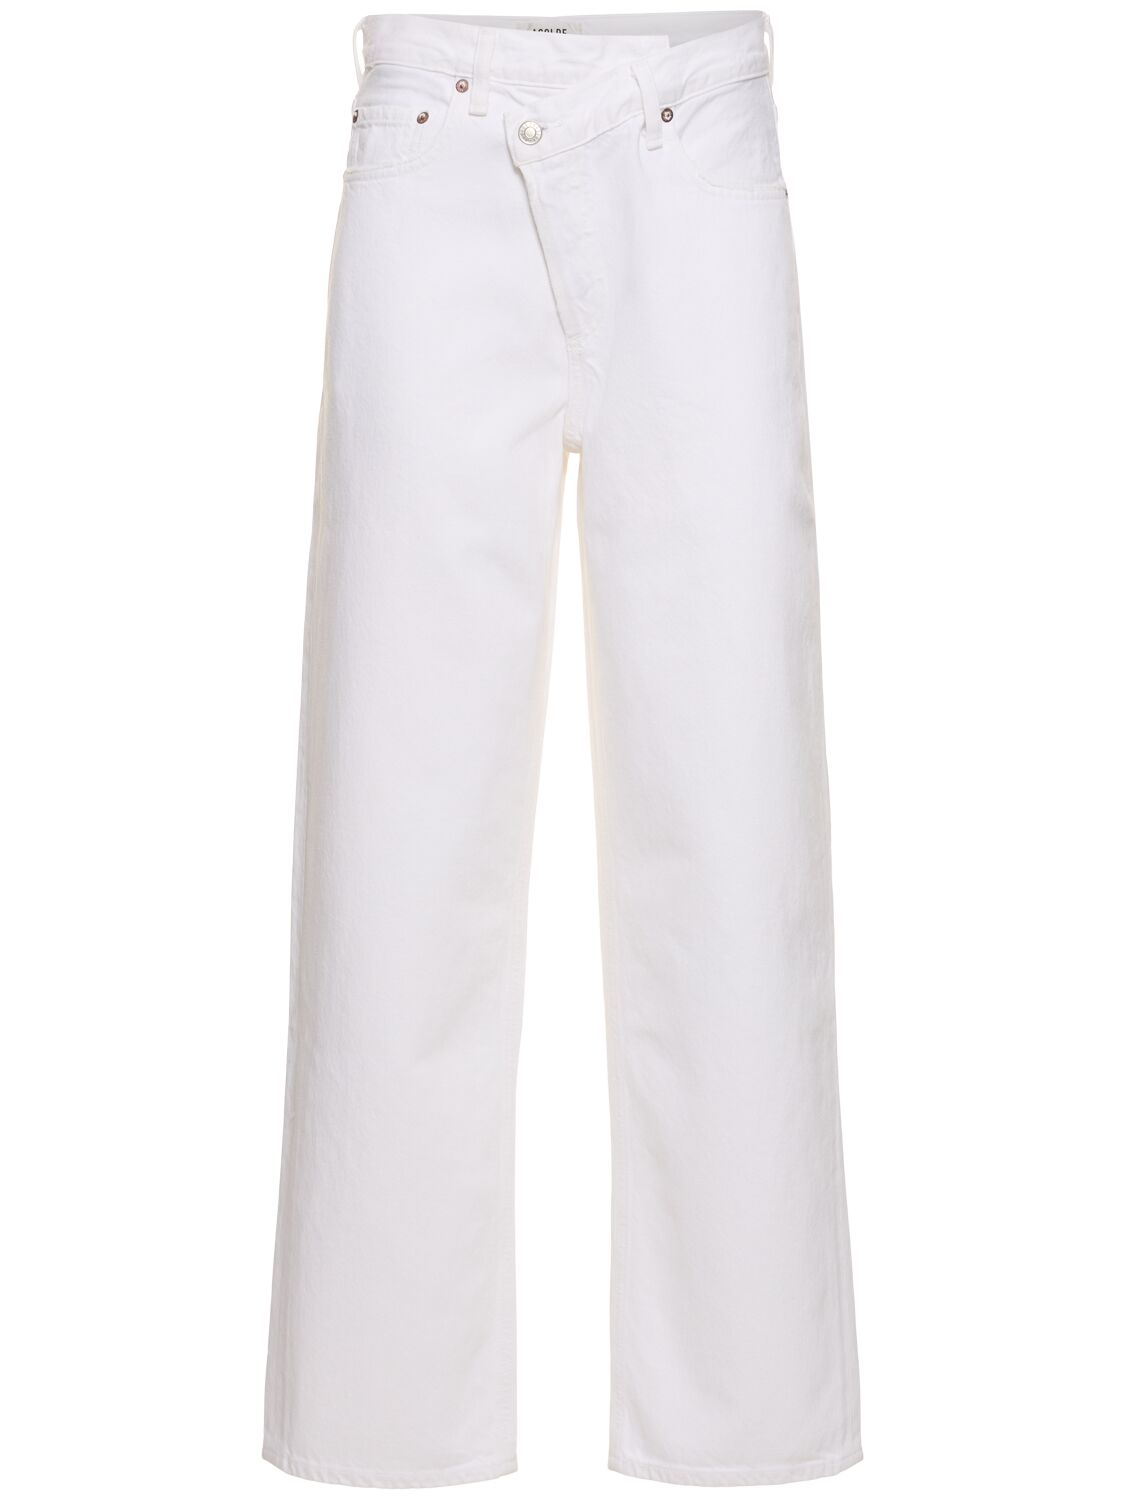 Image of Criss Cross Cotton Straight Jeans